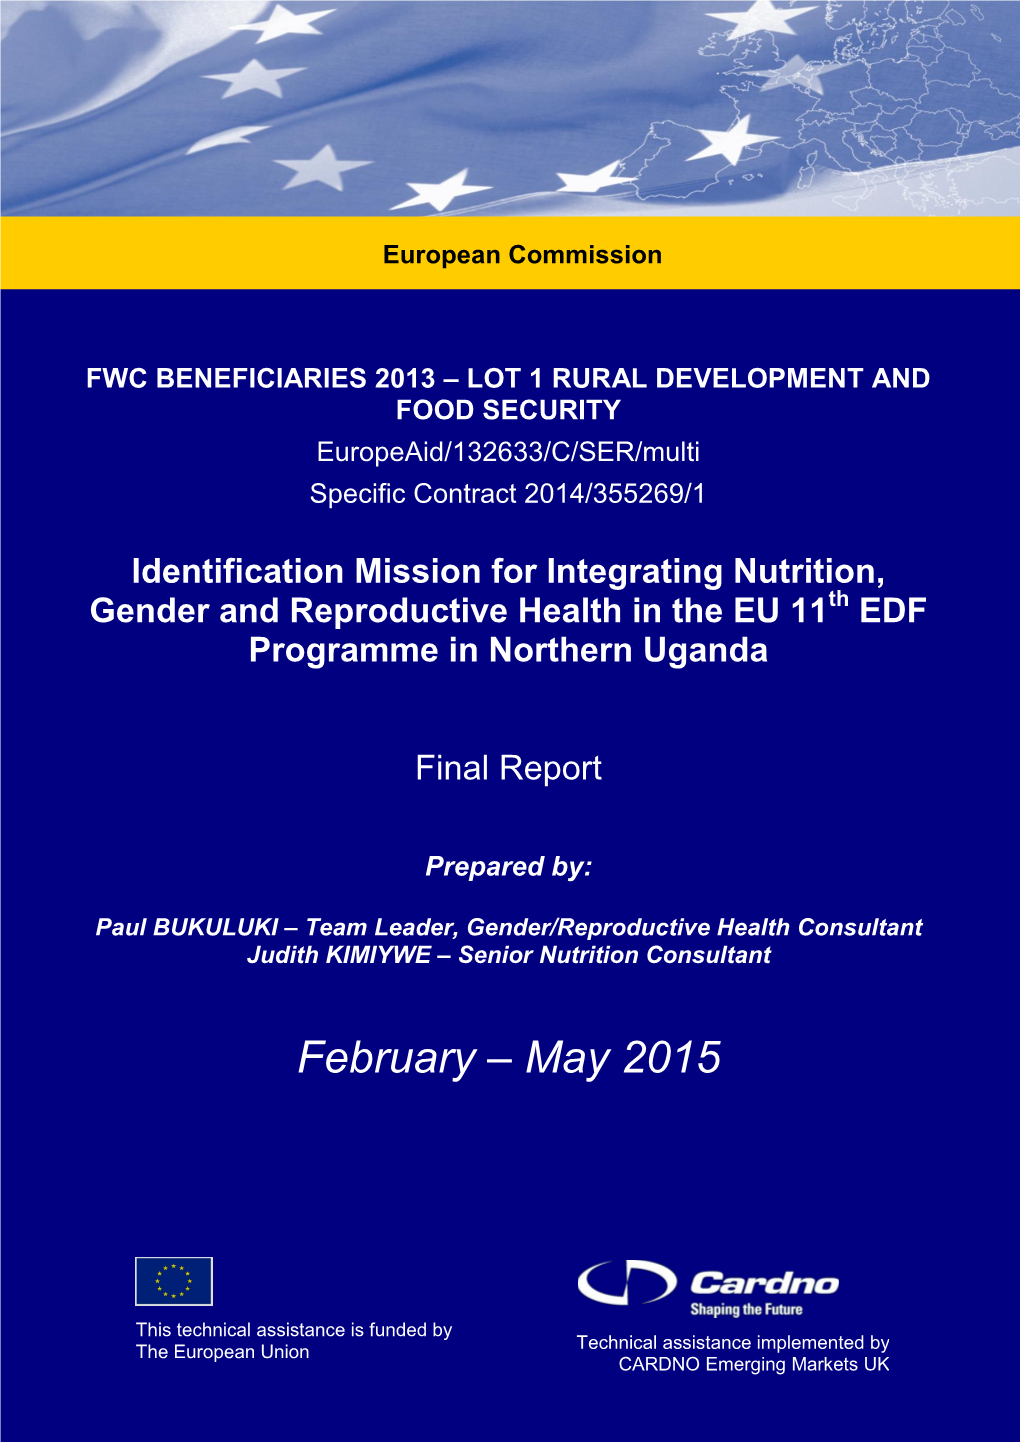 Identification Mission for Integrating Nutrition, Gender and Reproductive Health in the EU 11Th EDF Programme in Northern Uganda